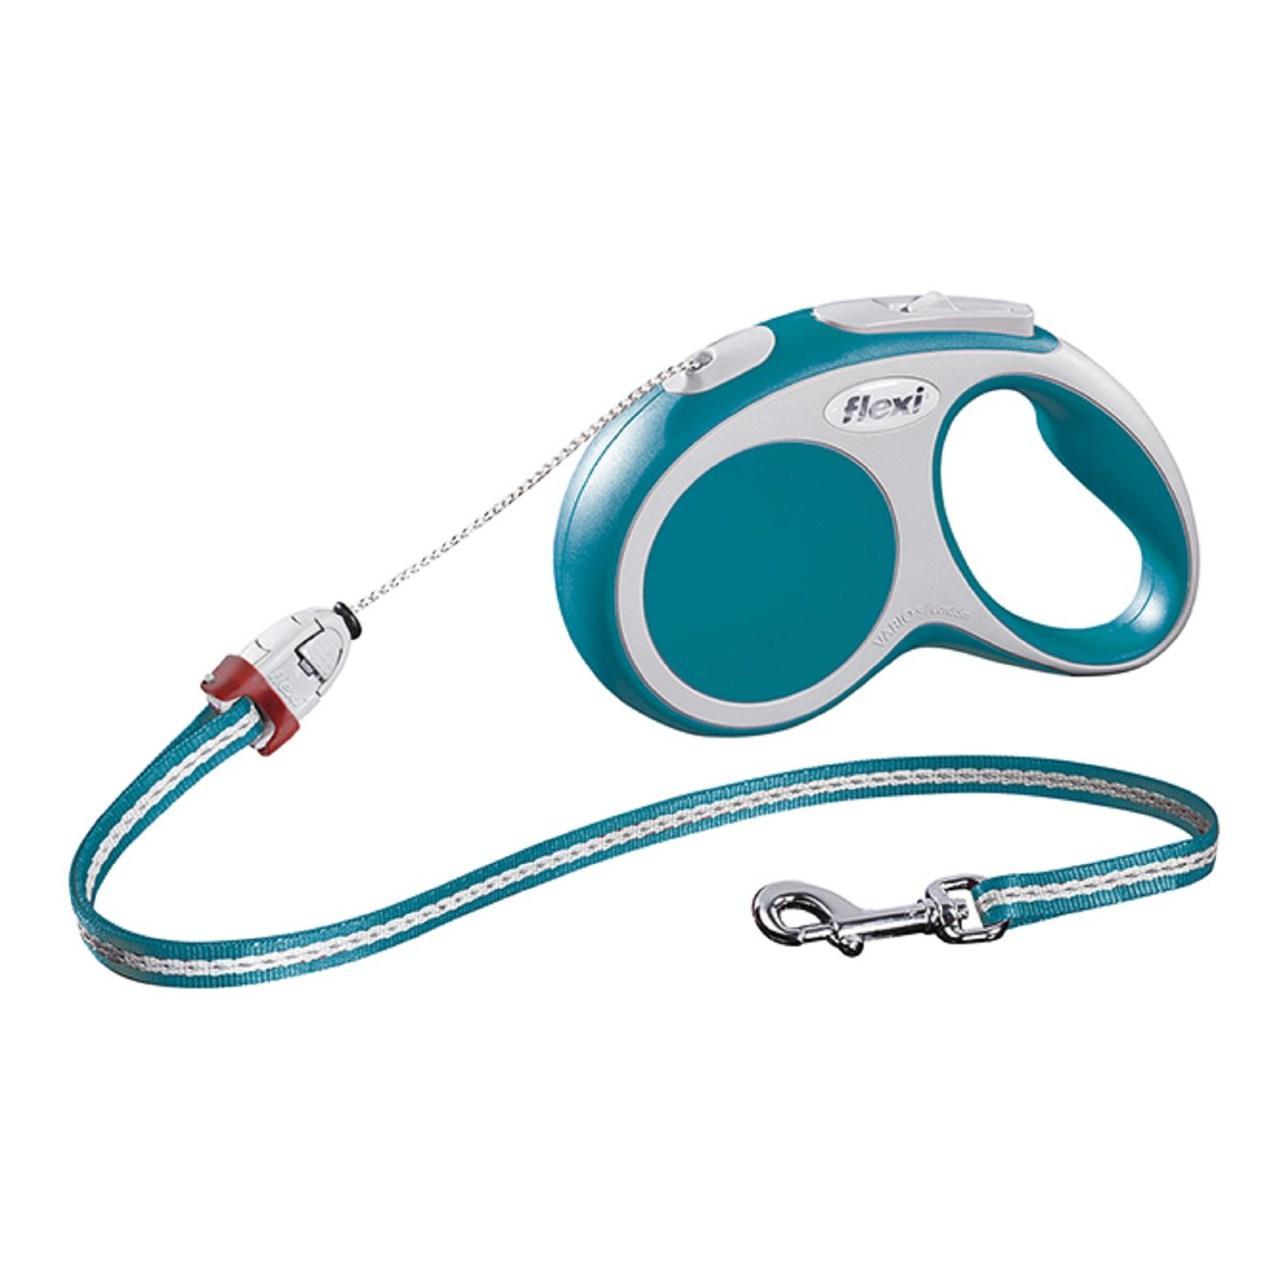 An image of Flexi Vario Small 8 Meter Cord Turquoise